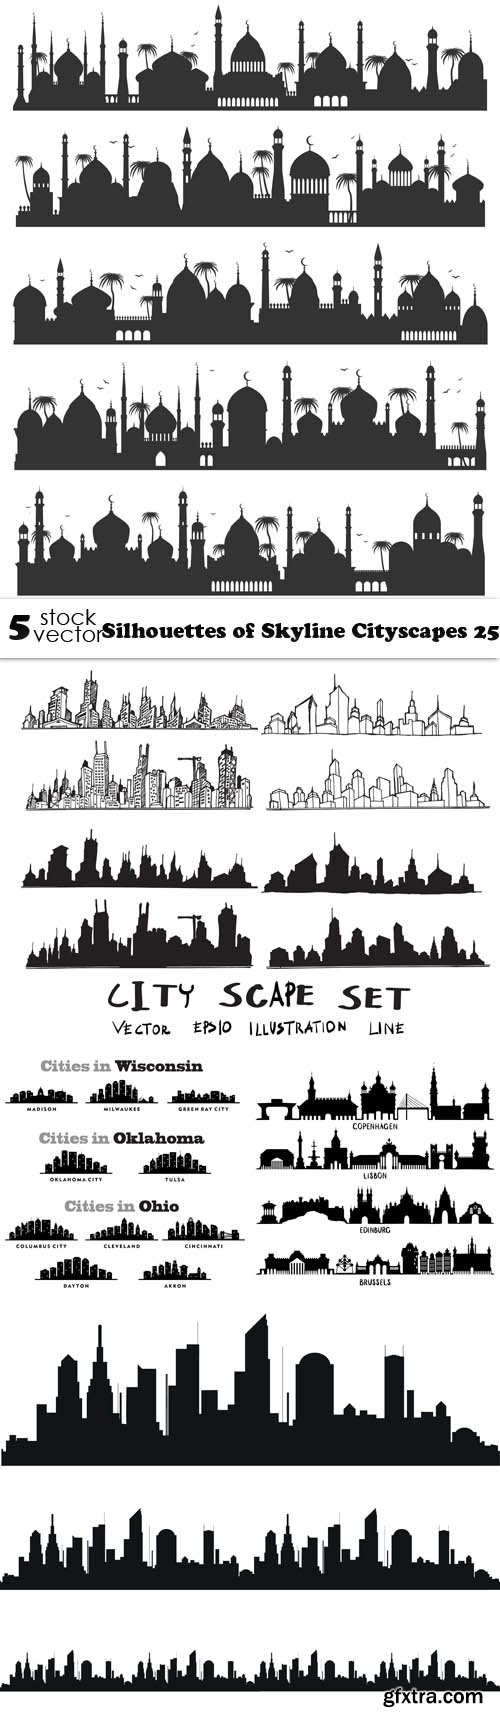 Vectors - Silhouettes of Skyline Cityscapes 25